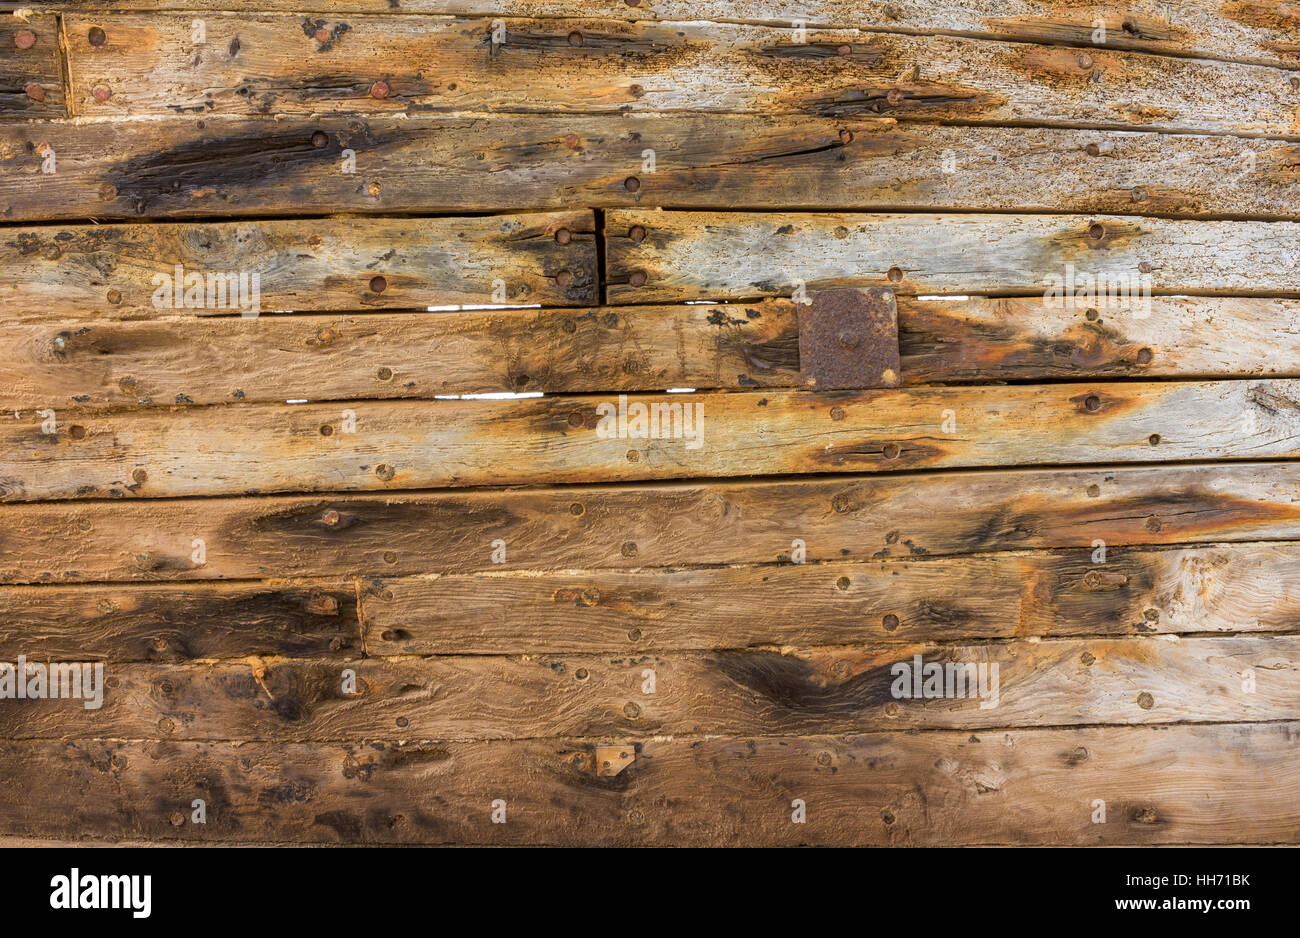 Fragment of old wood boat hull Stock Photo